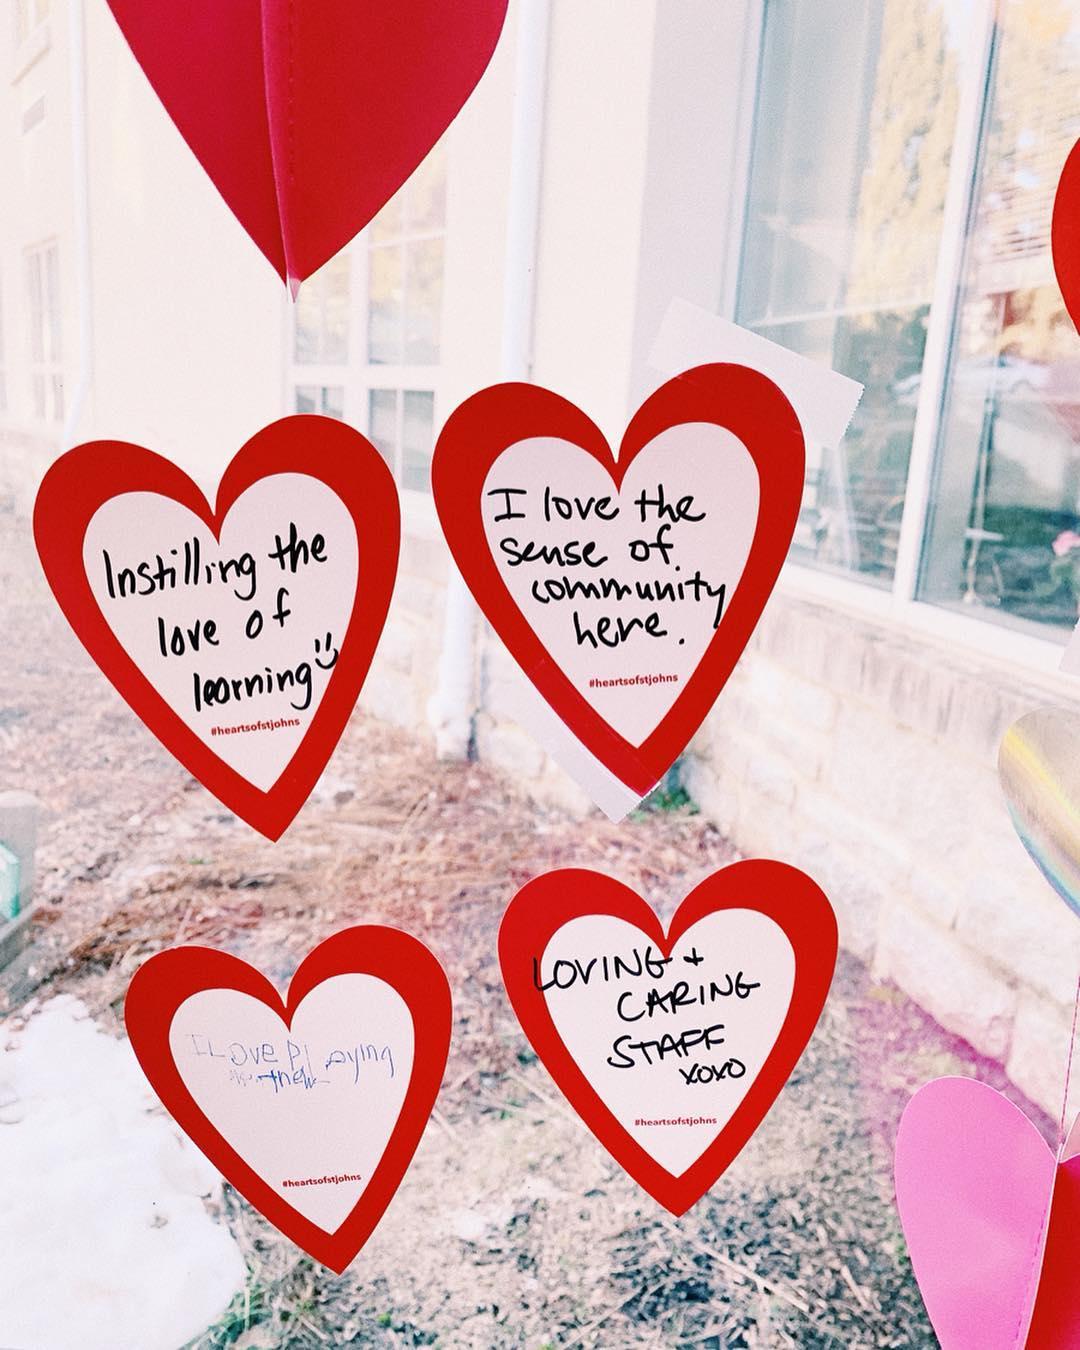 Hearts taped on a window with comments about what people love about St. John's